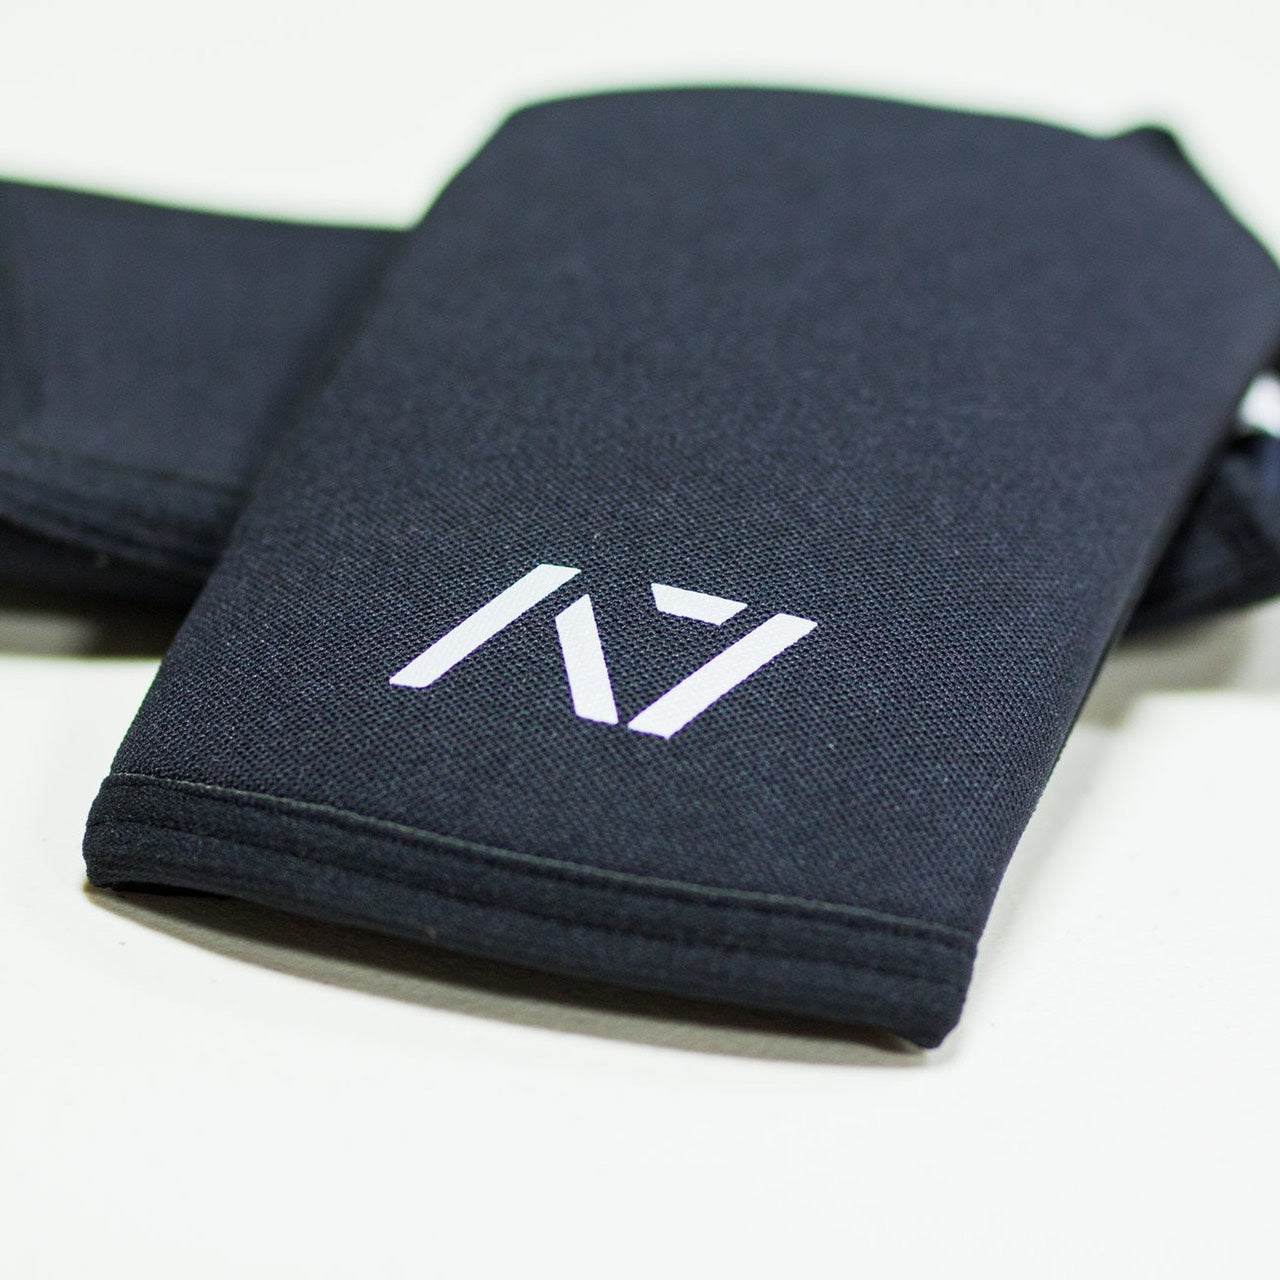 A7 7mm Elbow Sleeves – A7 Japan